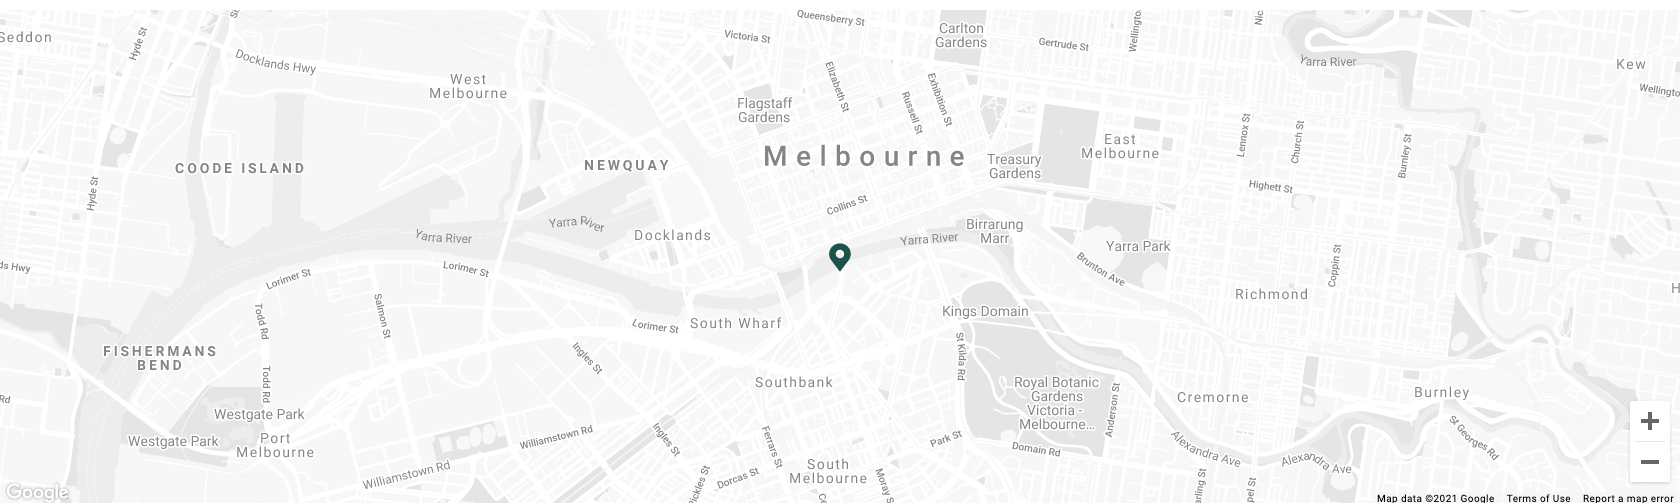 Map image of Crown Towers Melbourne